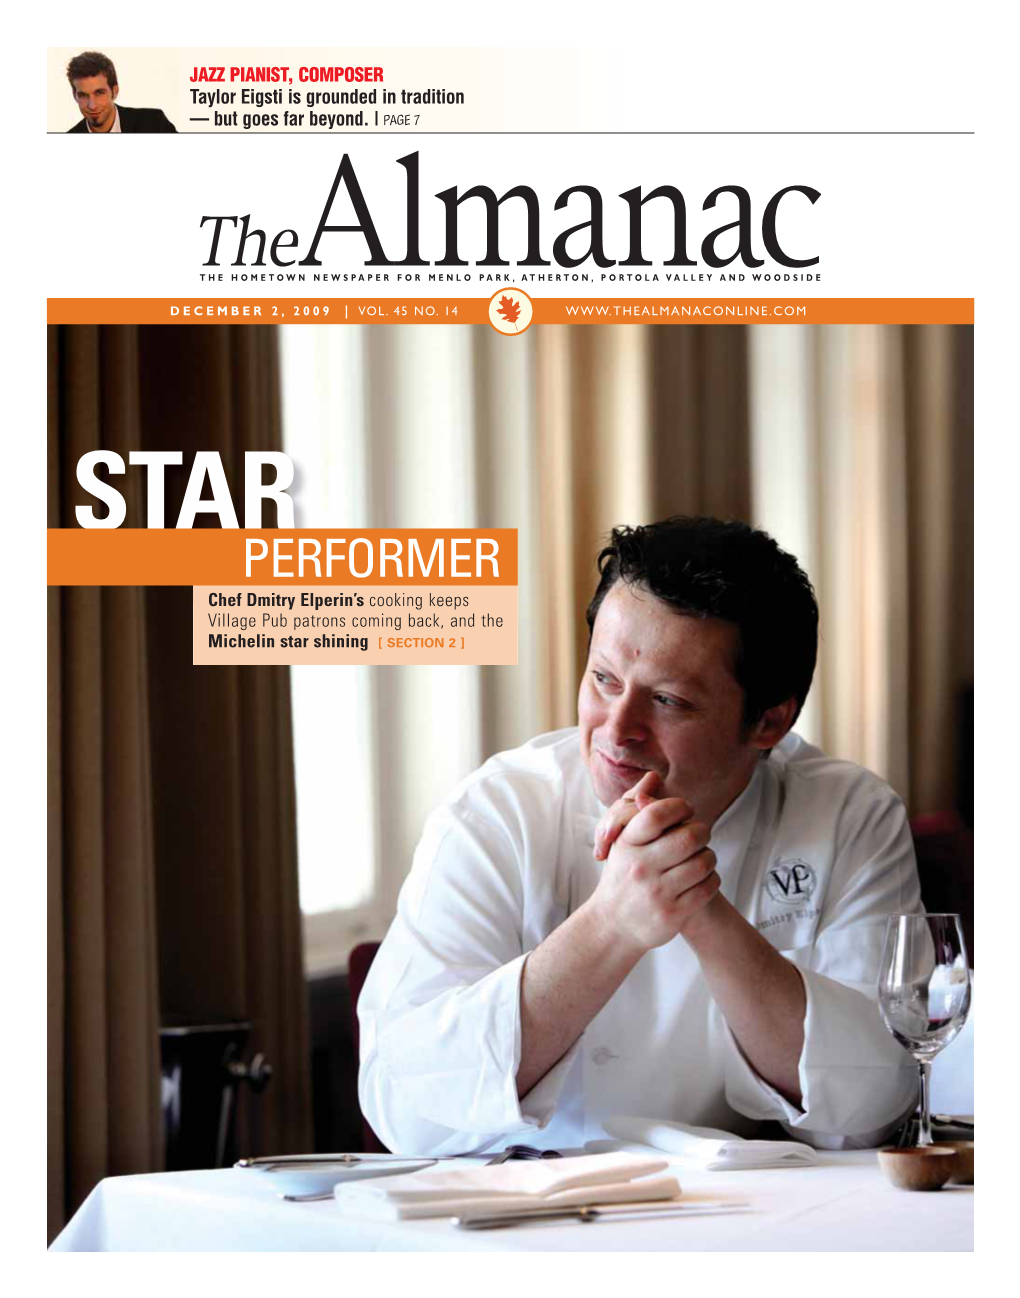 PERFORMER Chef Dmitry Elperin’S Cooking Keeps Village Pub Patrons Coming Back, and the Michelin Star Shining [ SECTION 2 ] Apr.Com